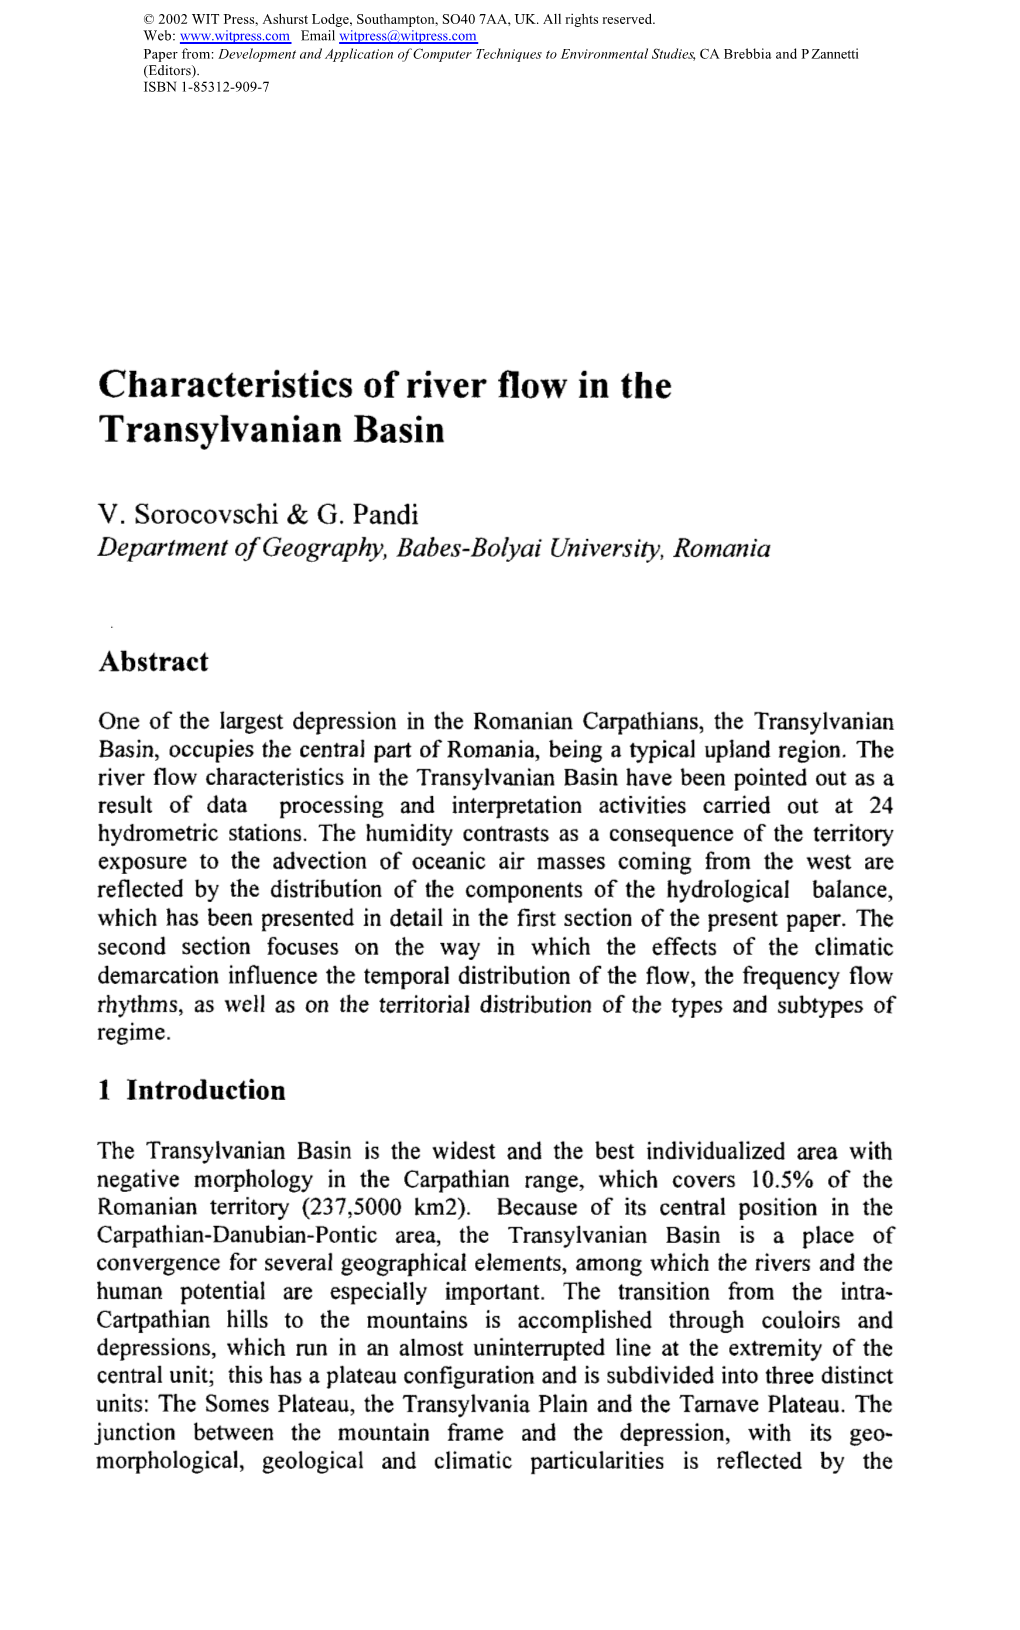 Characteristics of River Flow in the Transylvanian Basin